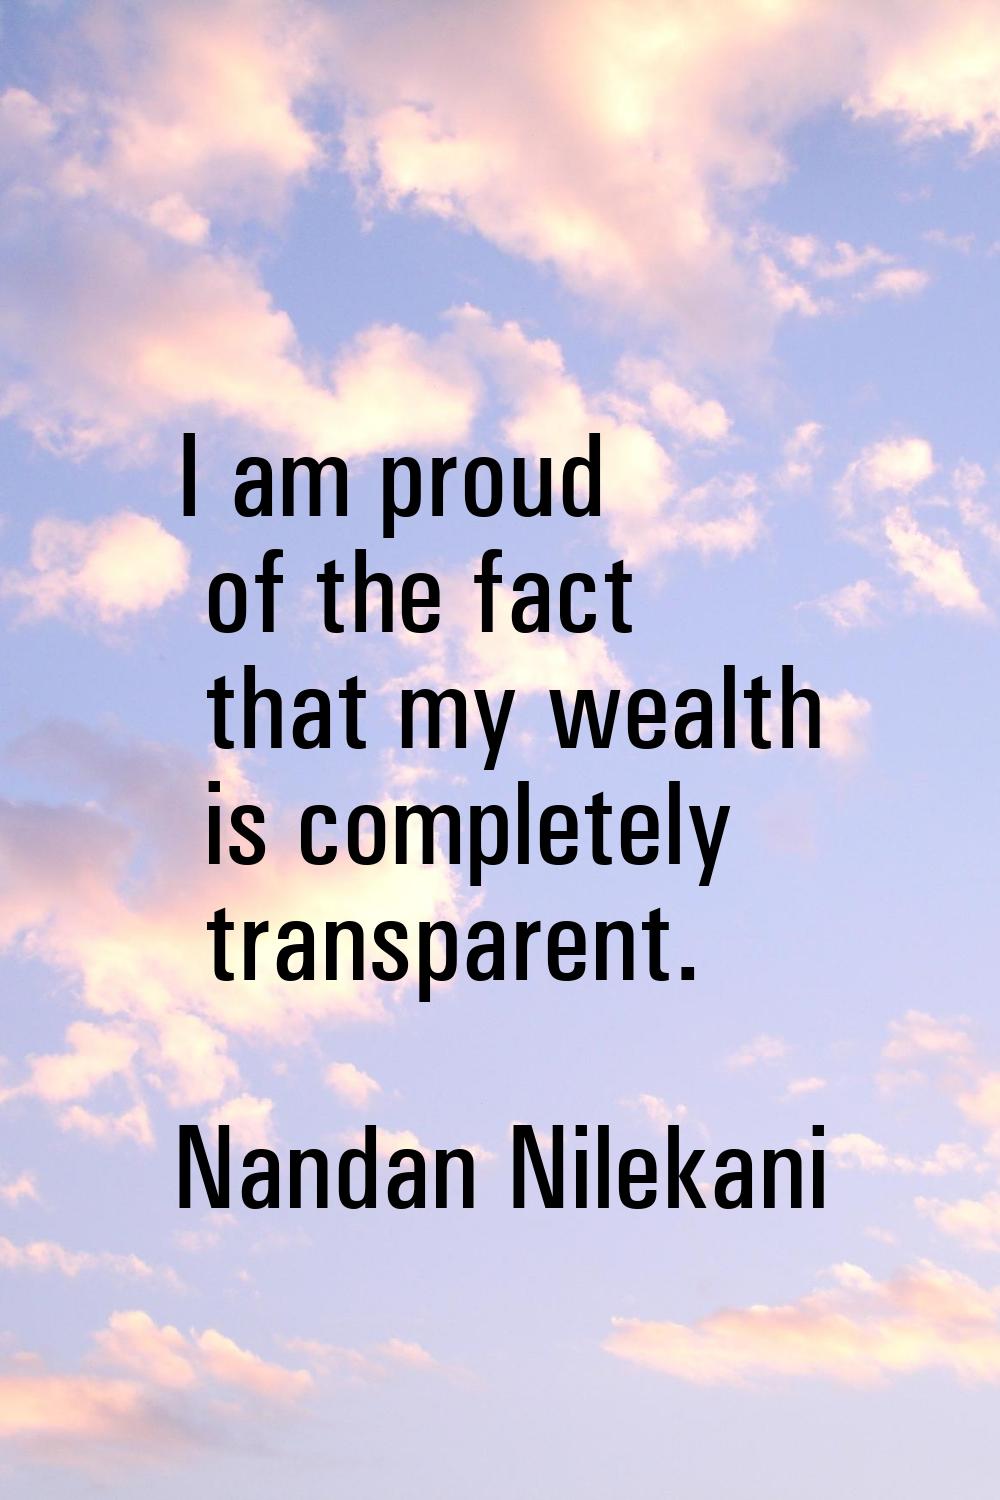 I am proud of the fact that my wealth is completely transparent.